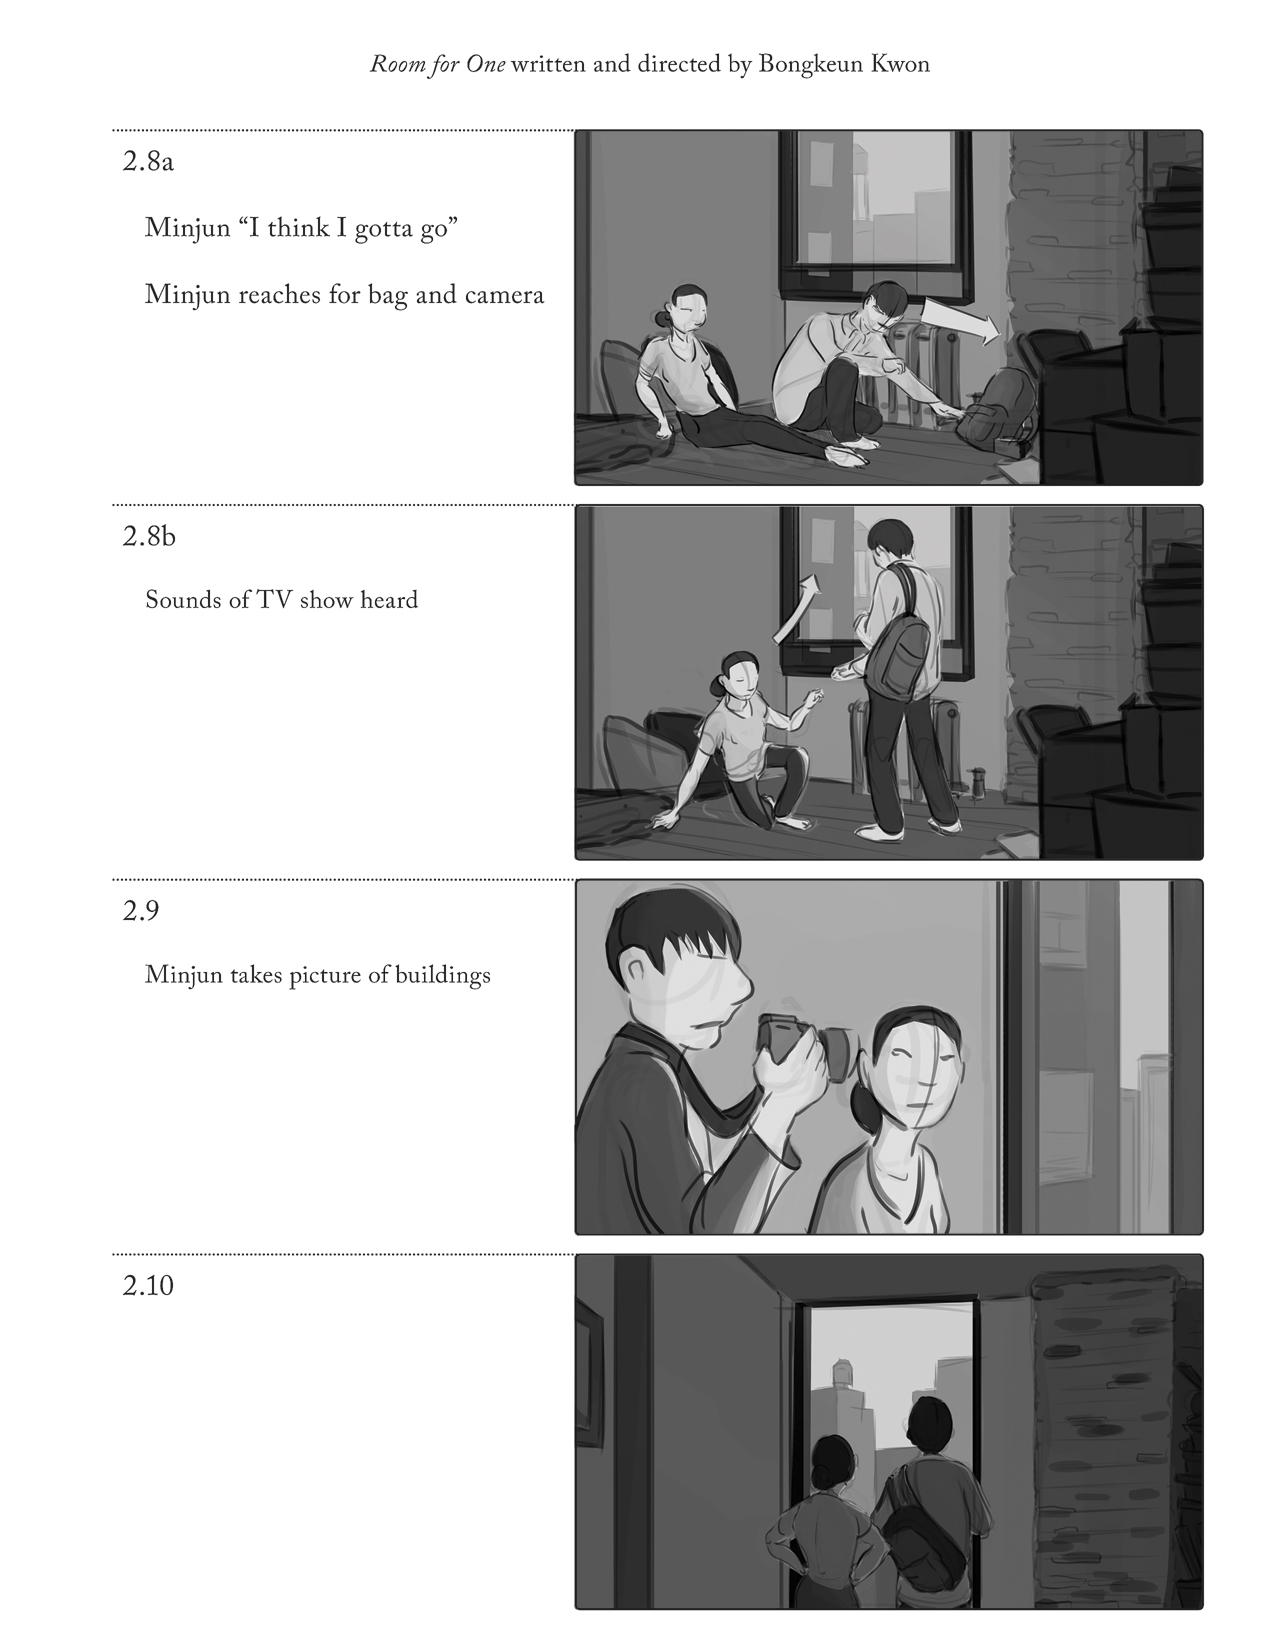 All-live-action-storyboards-with-new-vertical-format-5